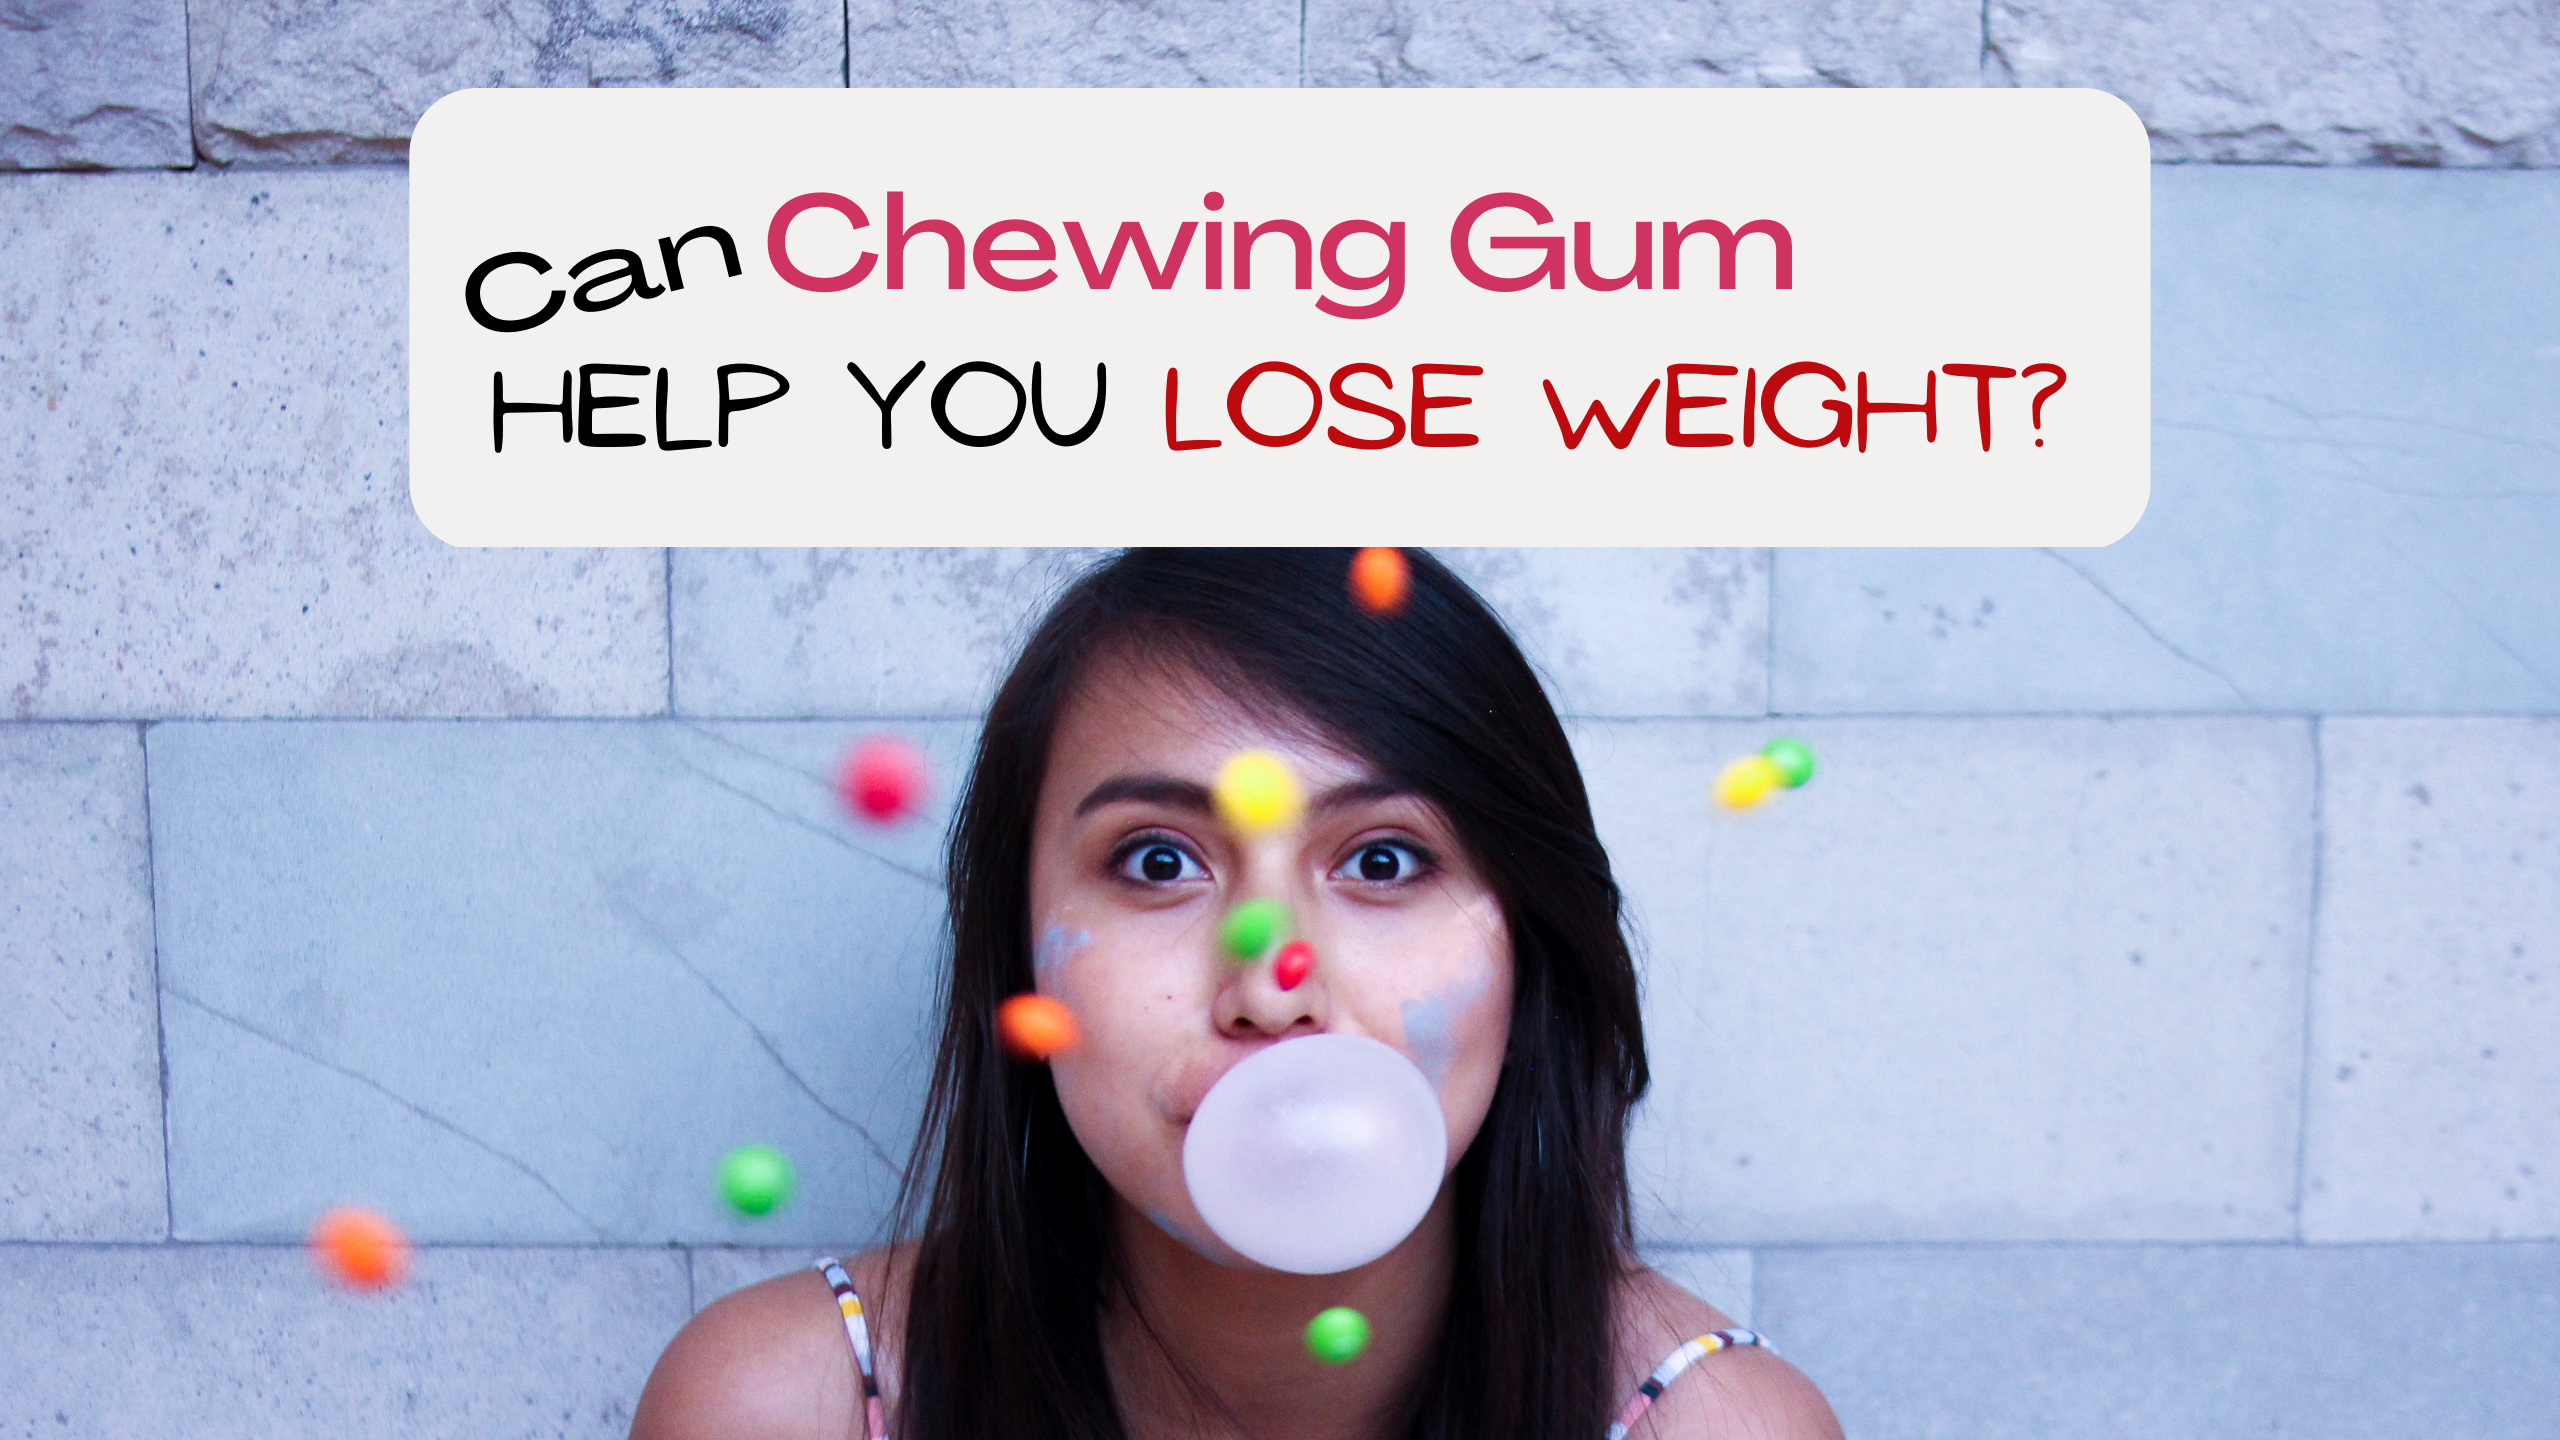 Can Chewing Gum Help You Lose Weight